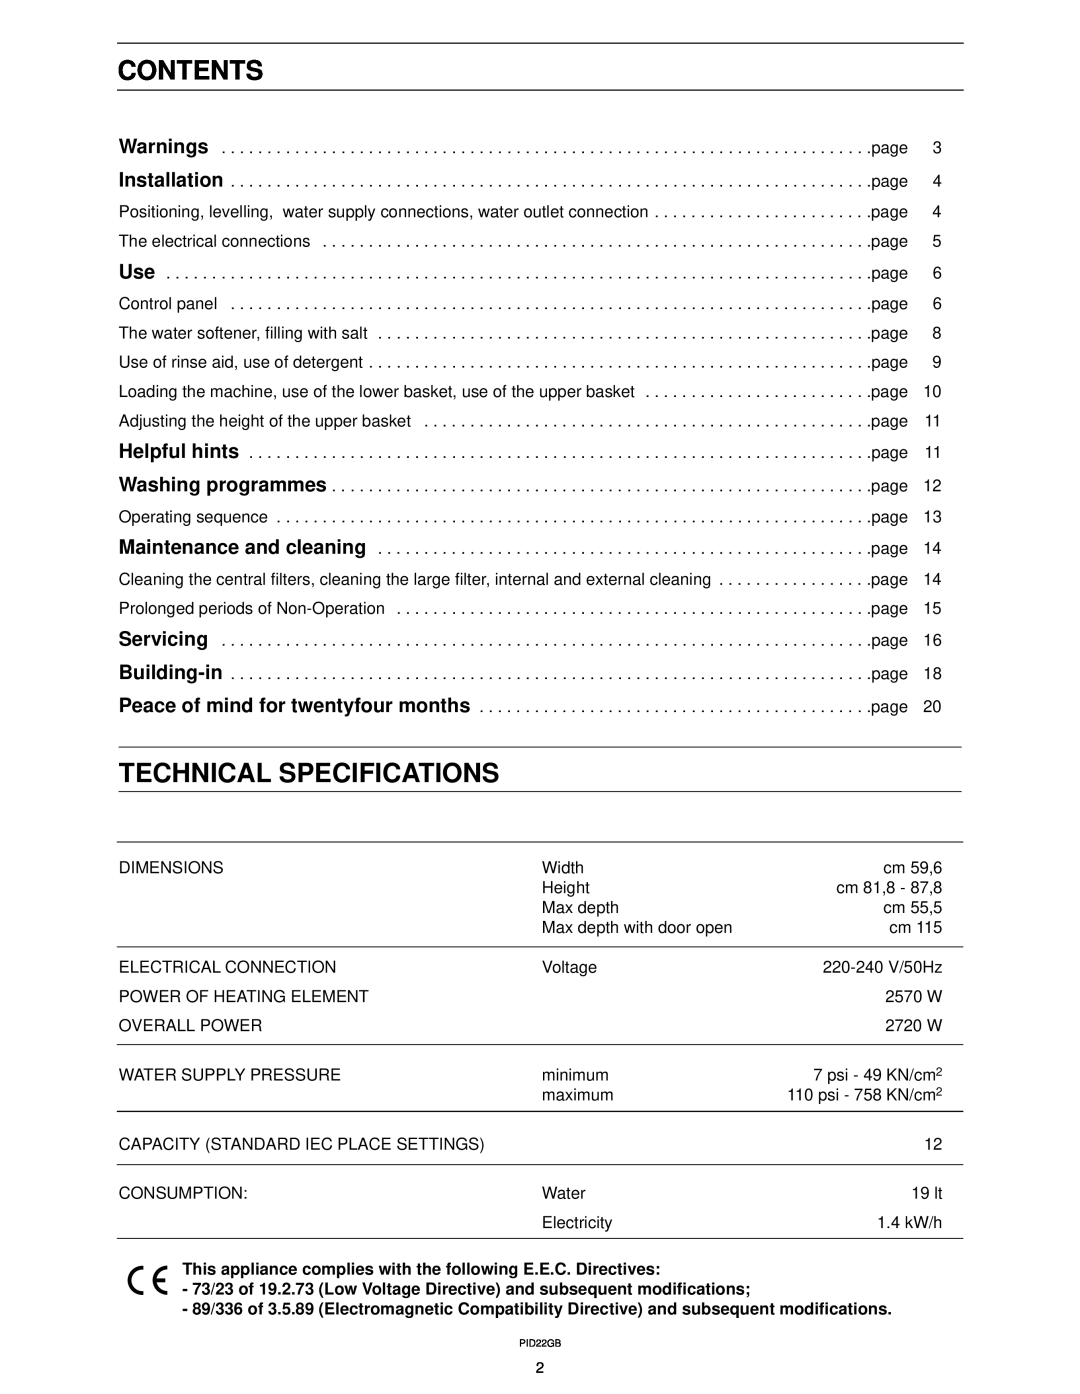 Zanussi ZT 617 manual Contents, Technical Specifications 